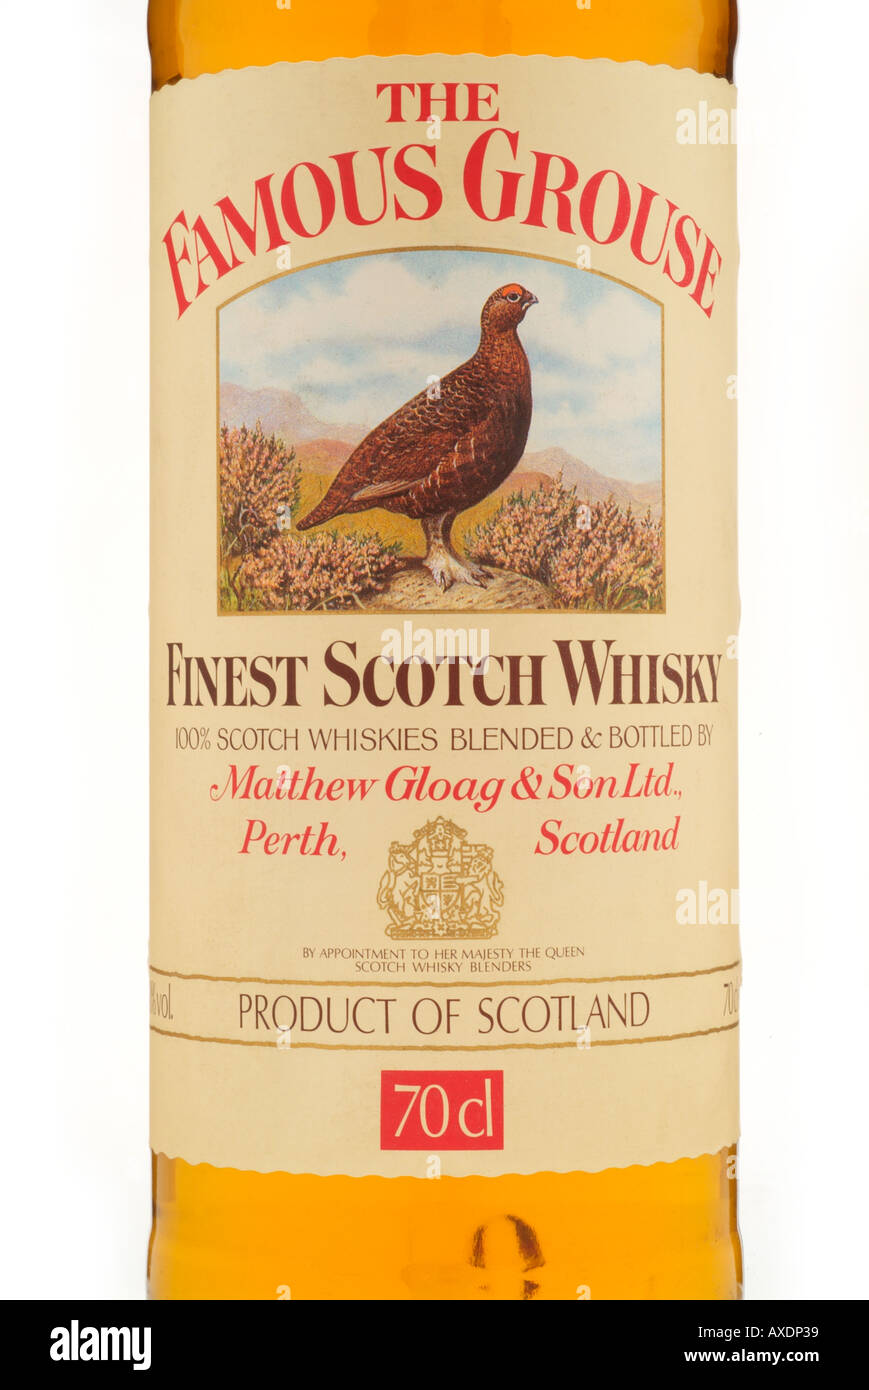 the famous grouse finest scotch whisky whiskey blended mathew gloag and son ltd perth scotland national game bird highland water Stock Photo